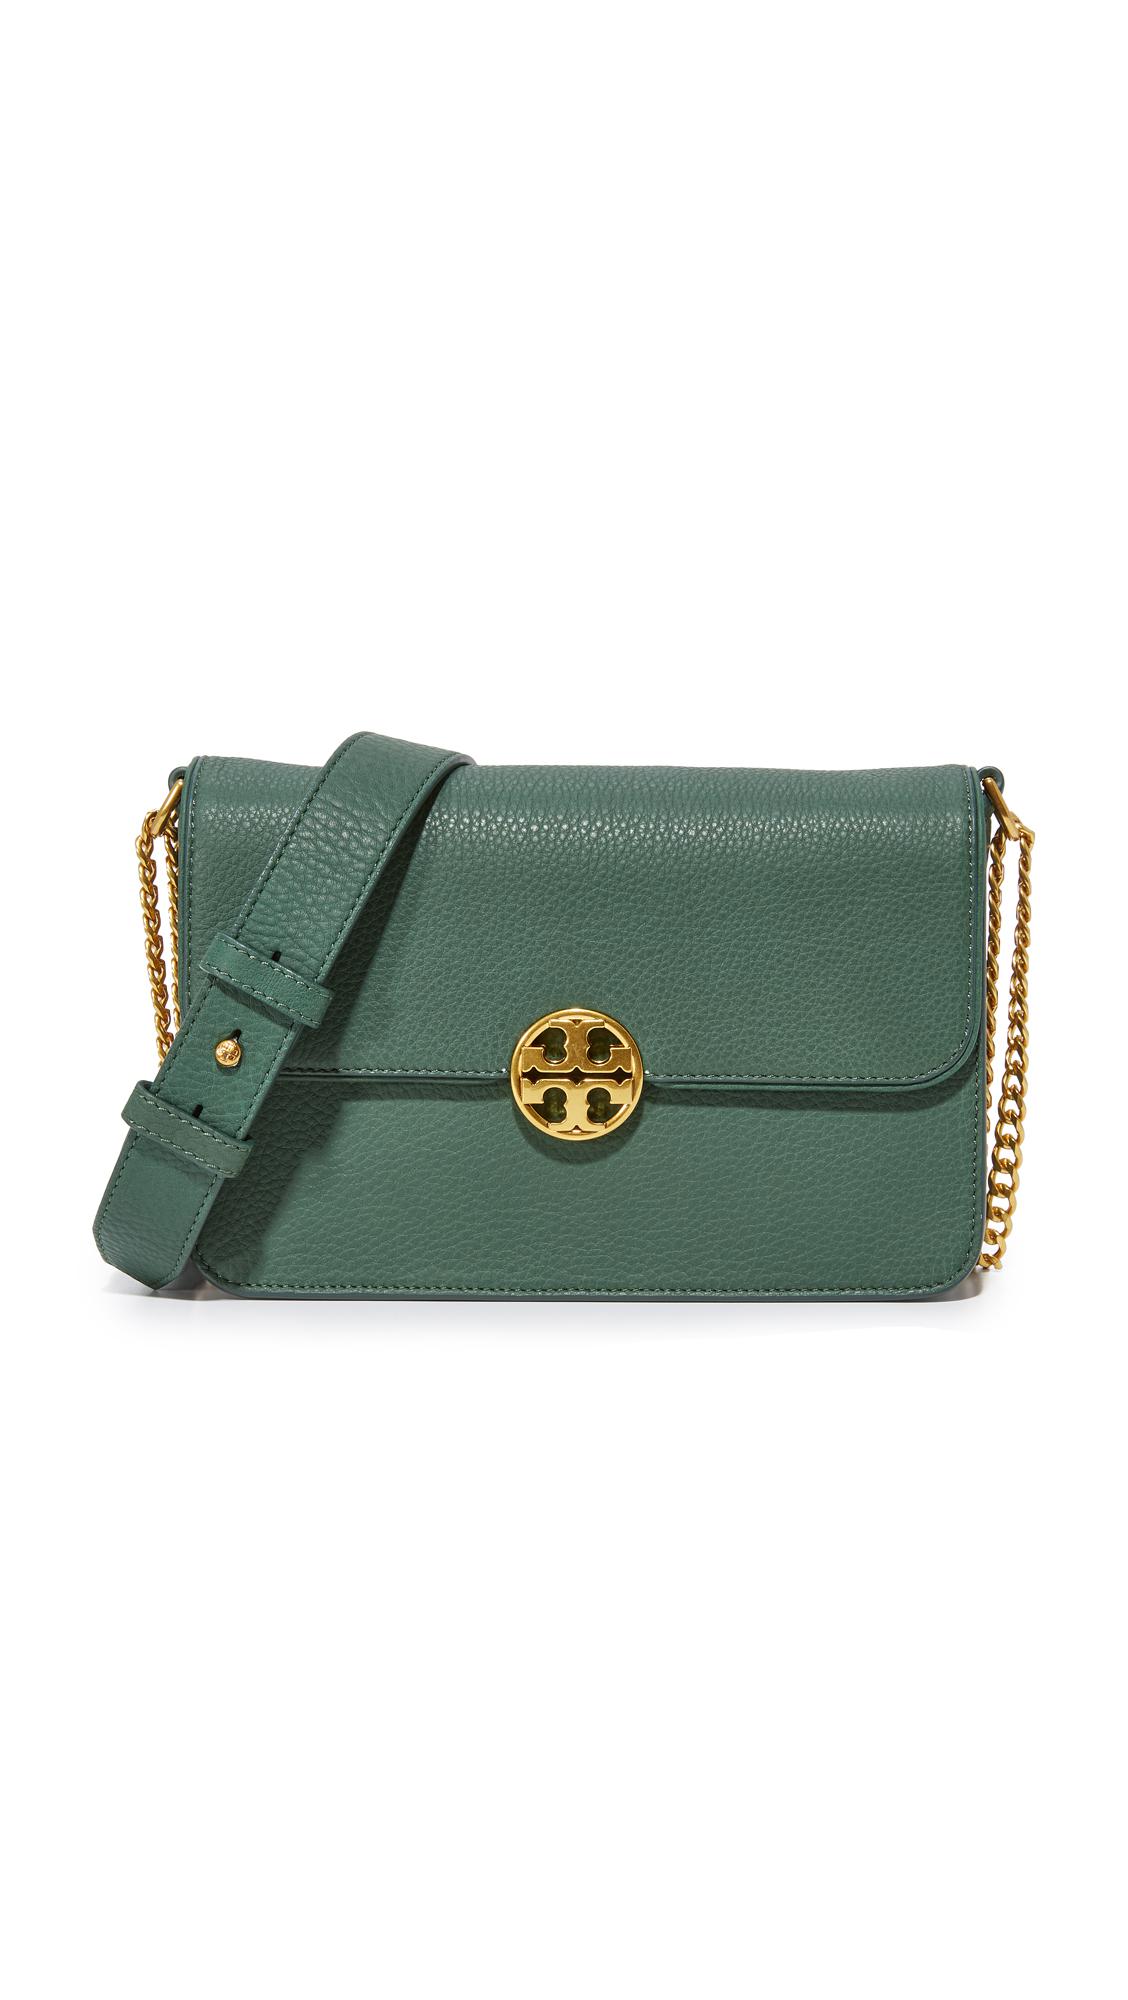 Tory Burch Chelsea Convertible Textured-Leather Shoulder Bag - Green